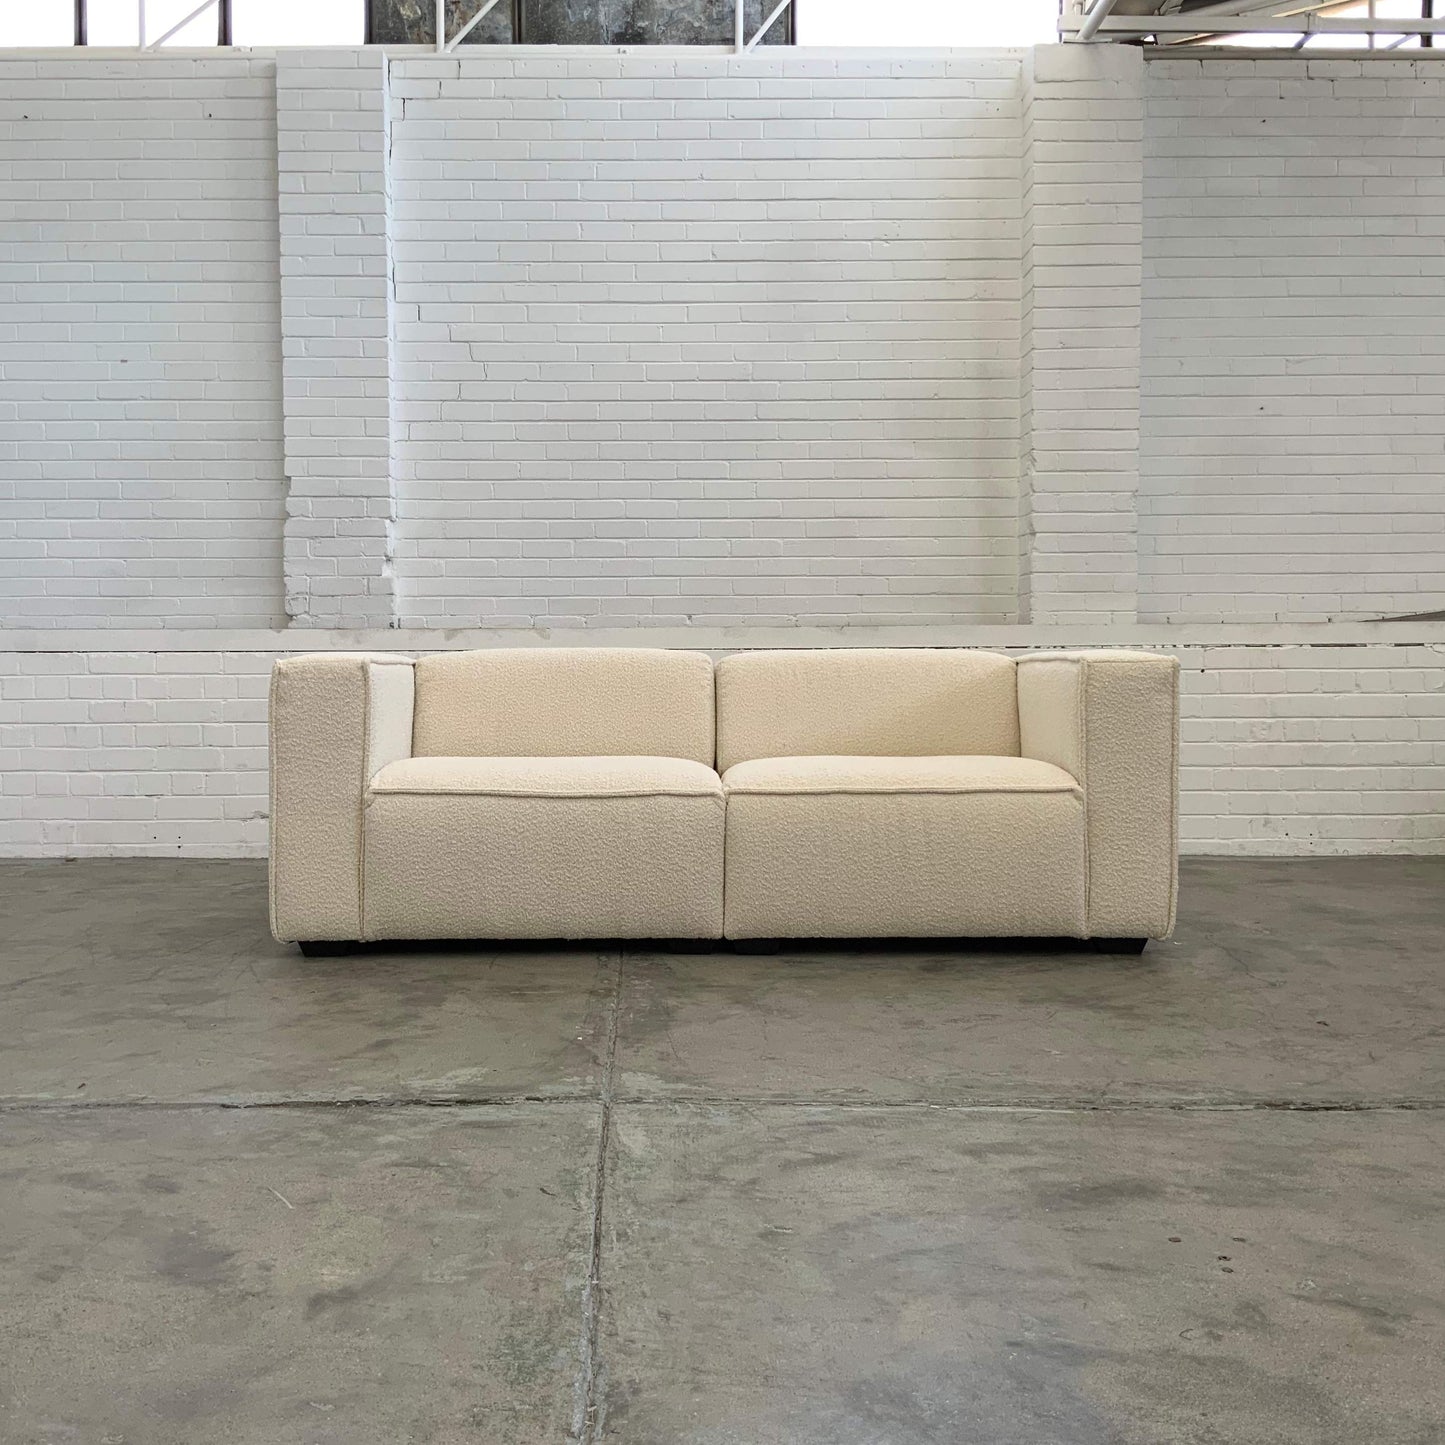 MERCURY SOFA | MID RANGE FABRICS | MULTIPLE SIZES AND OPTIONS AVAILABLE | MADE TO ORDER IN WA